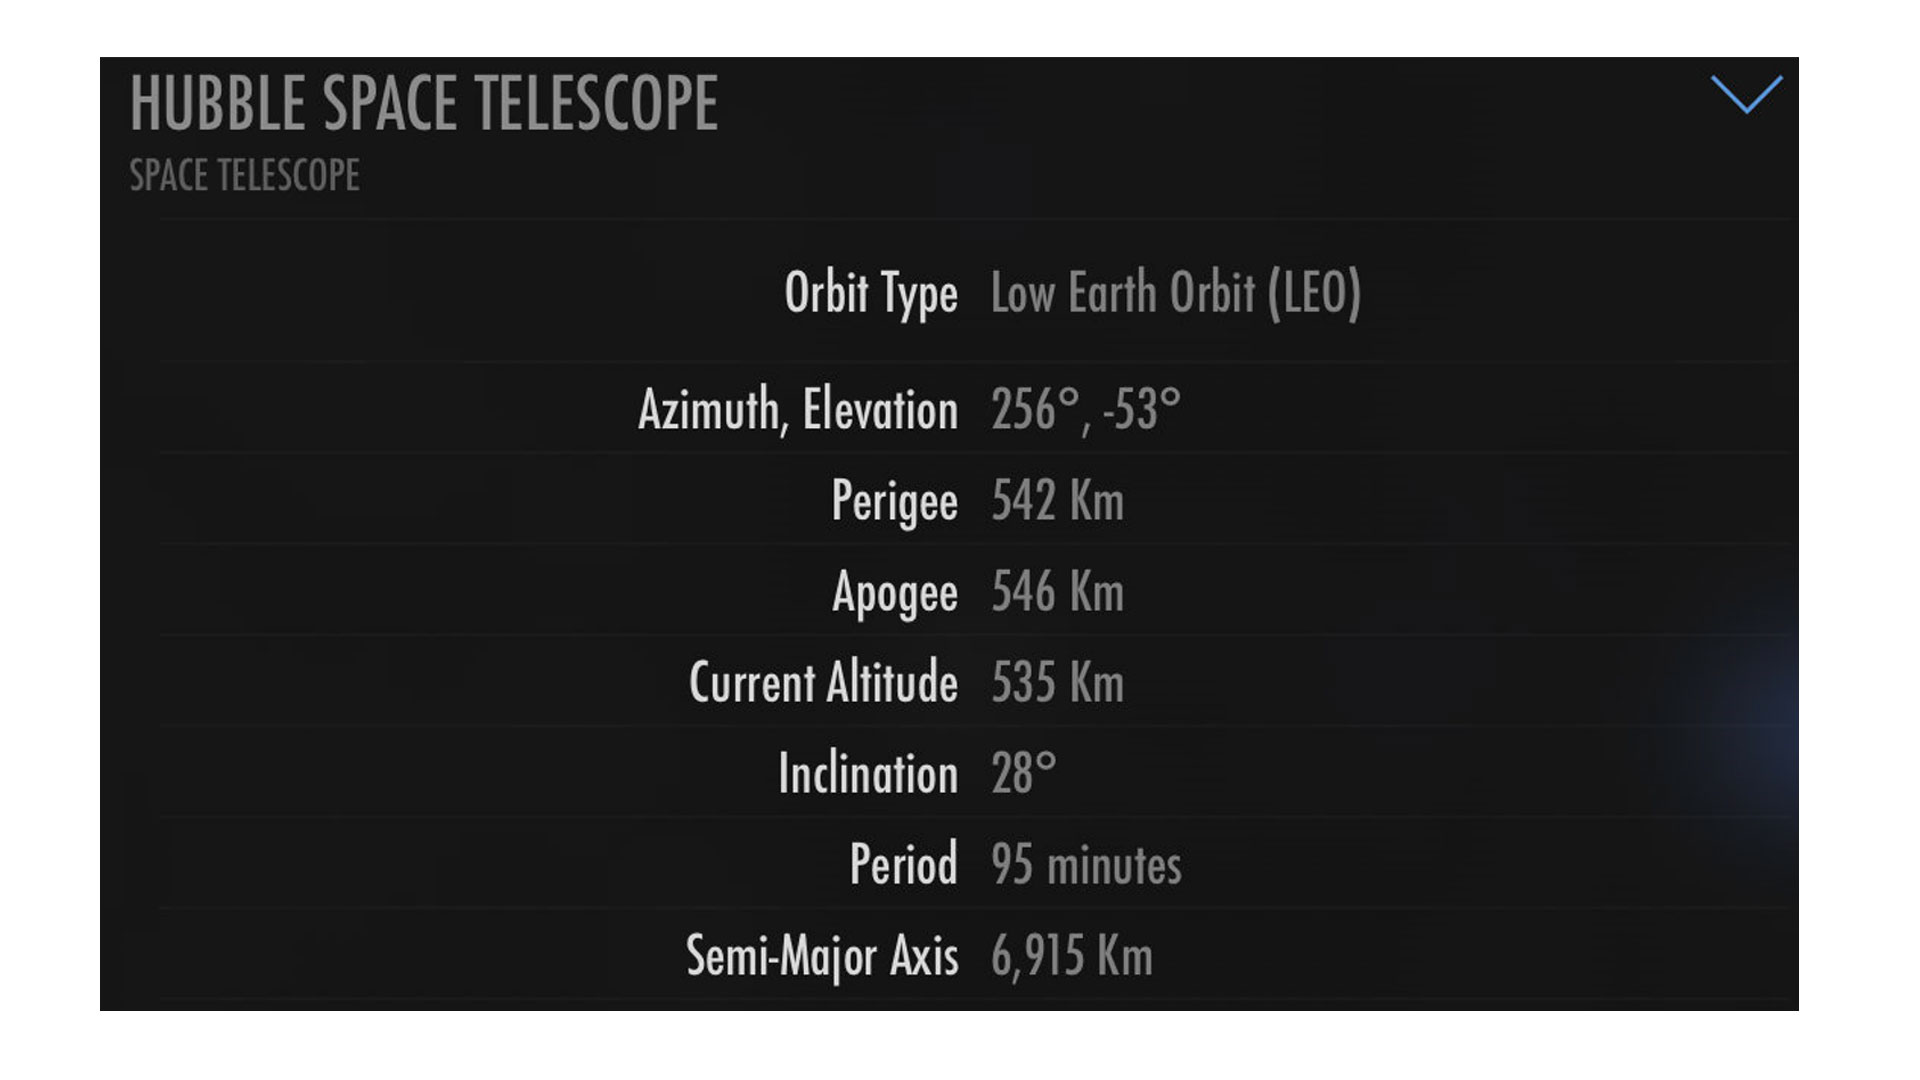 SkyView review: Image shows information about Hubble.